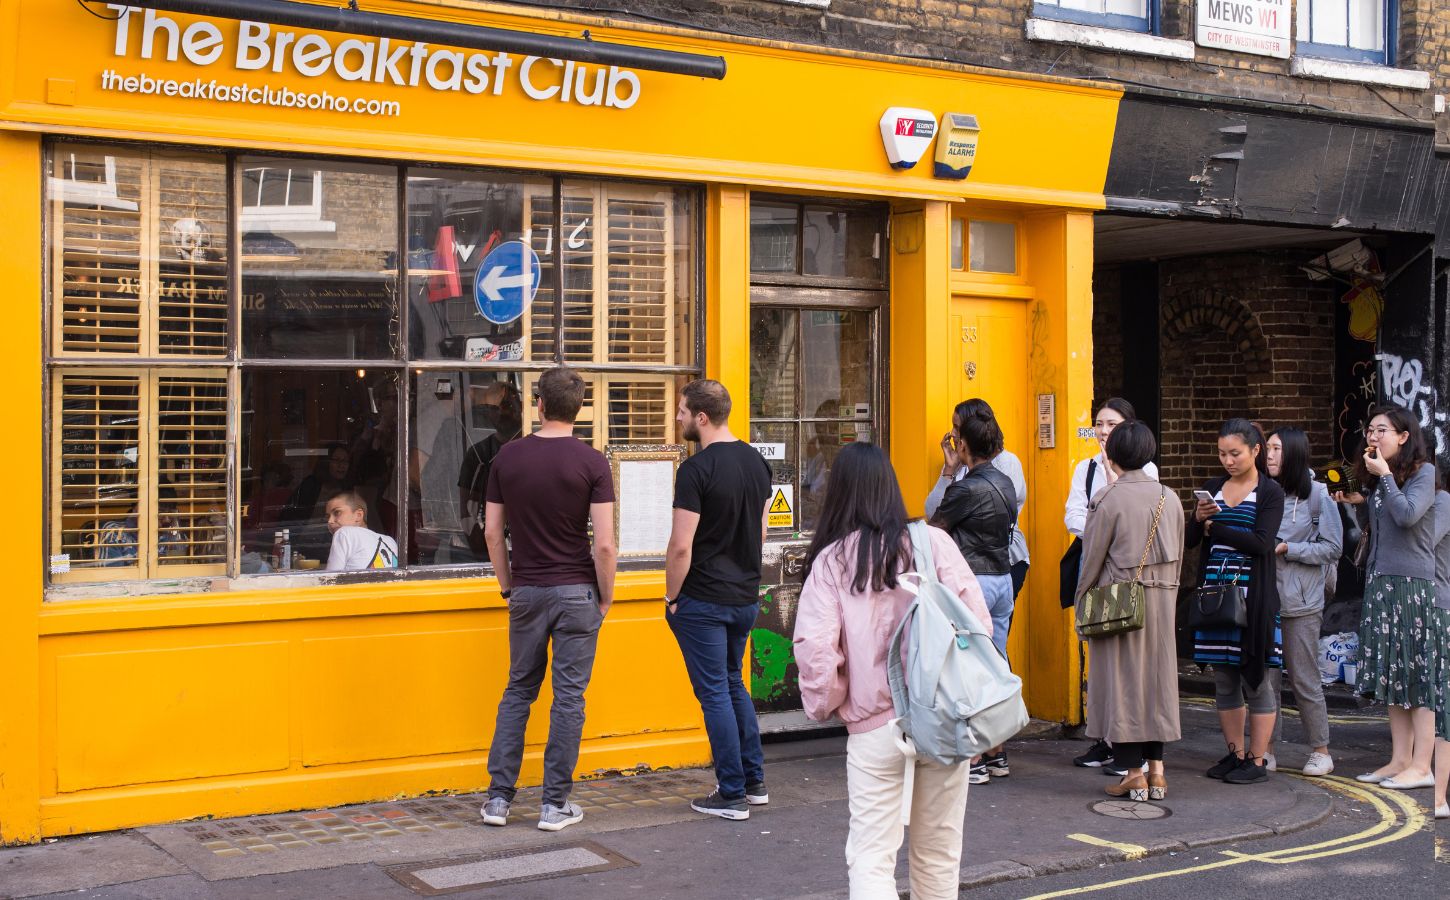 People queue outside London restaurant The Breakfast Club, which has gone vegan and vegetarian for Veganuary 2023